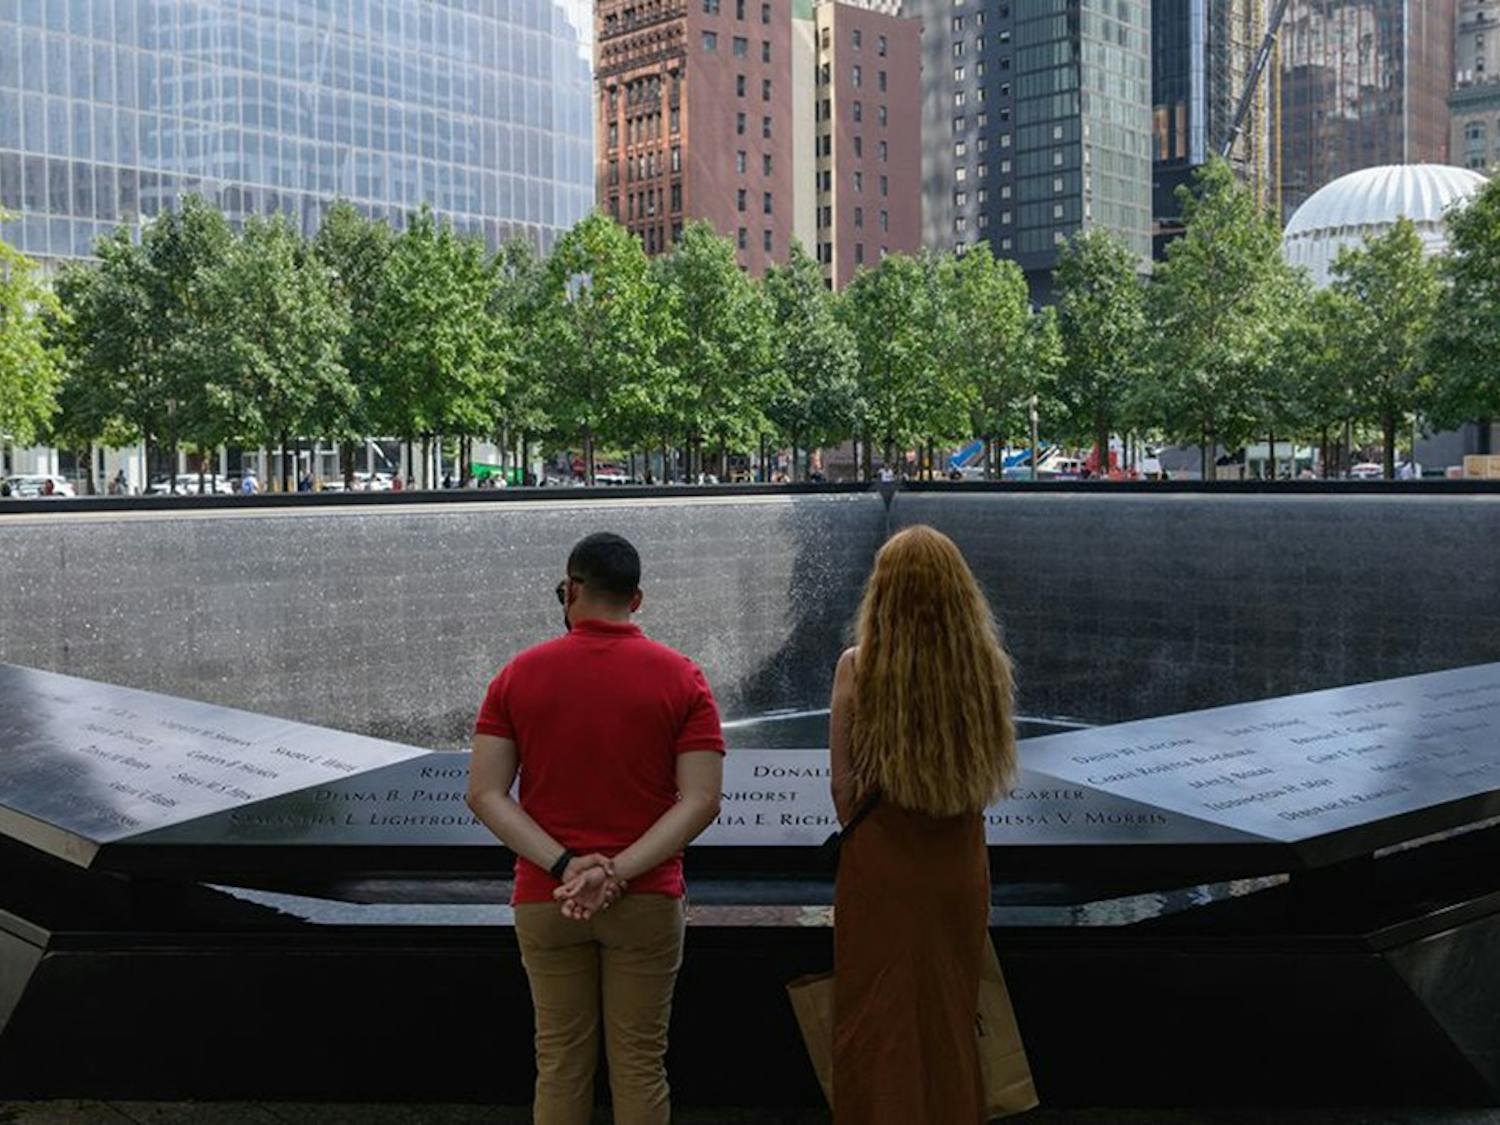 A couple stands before the National September 11 Memorial, marking the site of the south tower at the World Trade Center in New York, on September 8, 2021. (Angela Weiss/AFP via Getty Images/TNS)